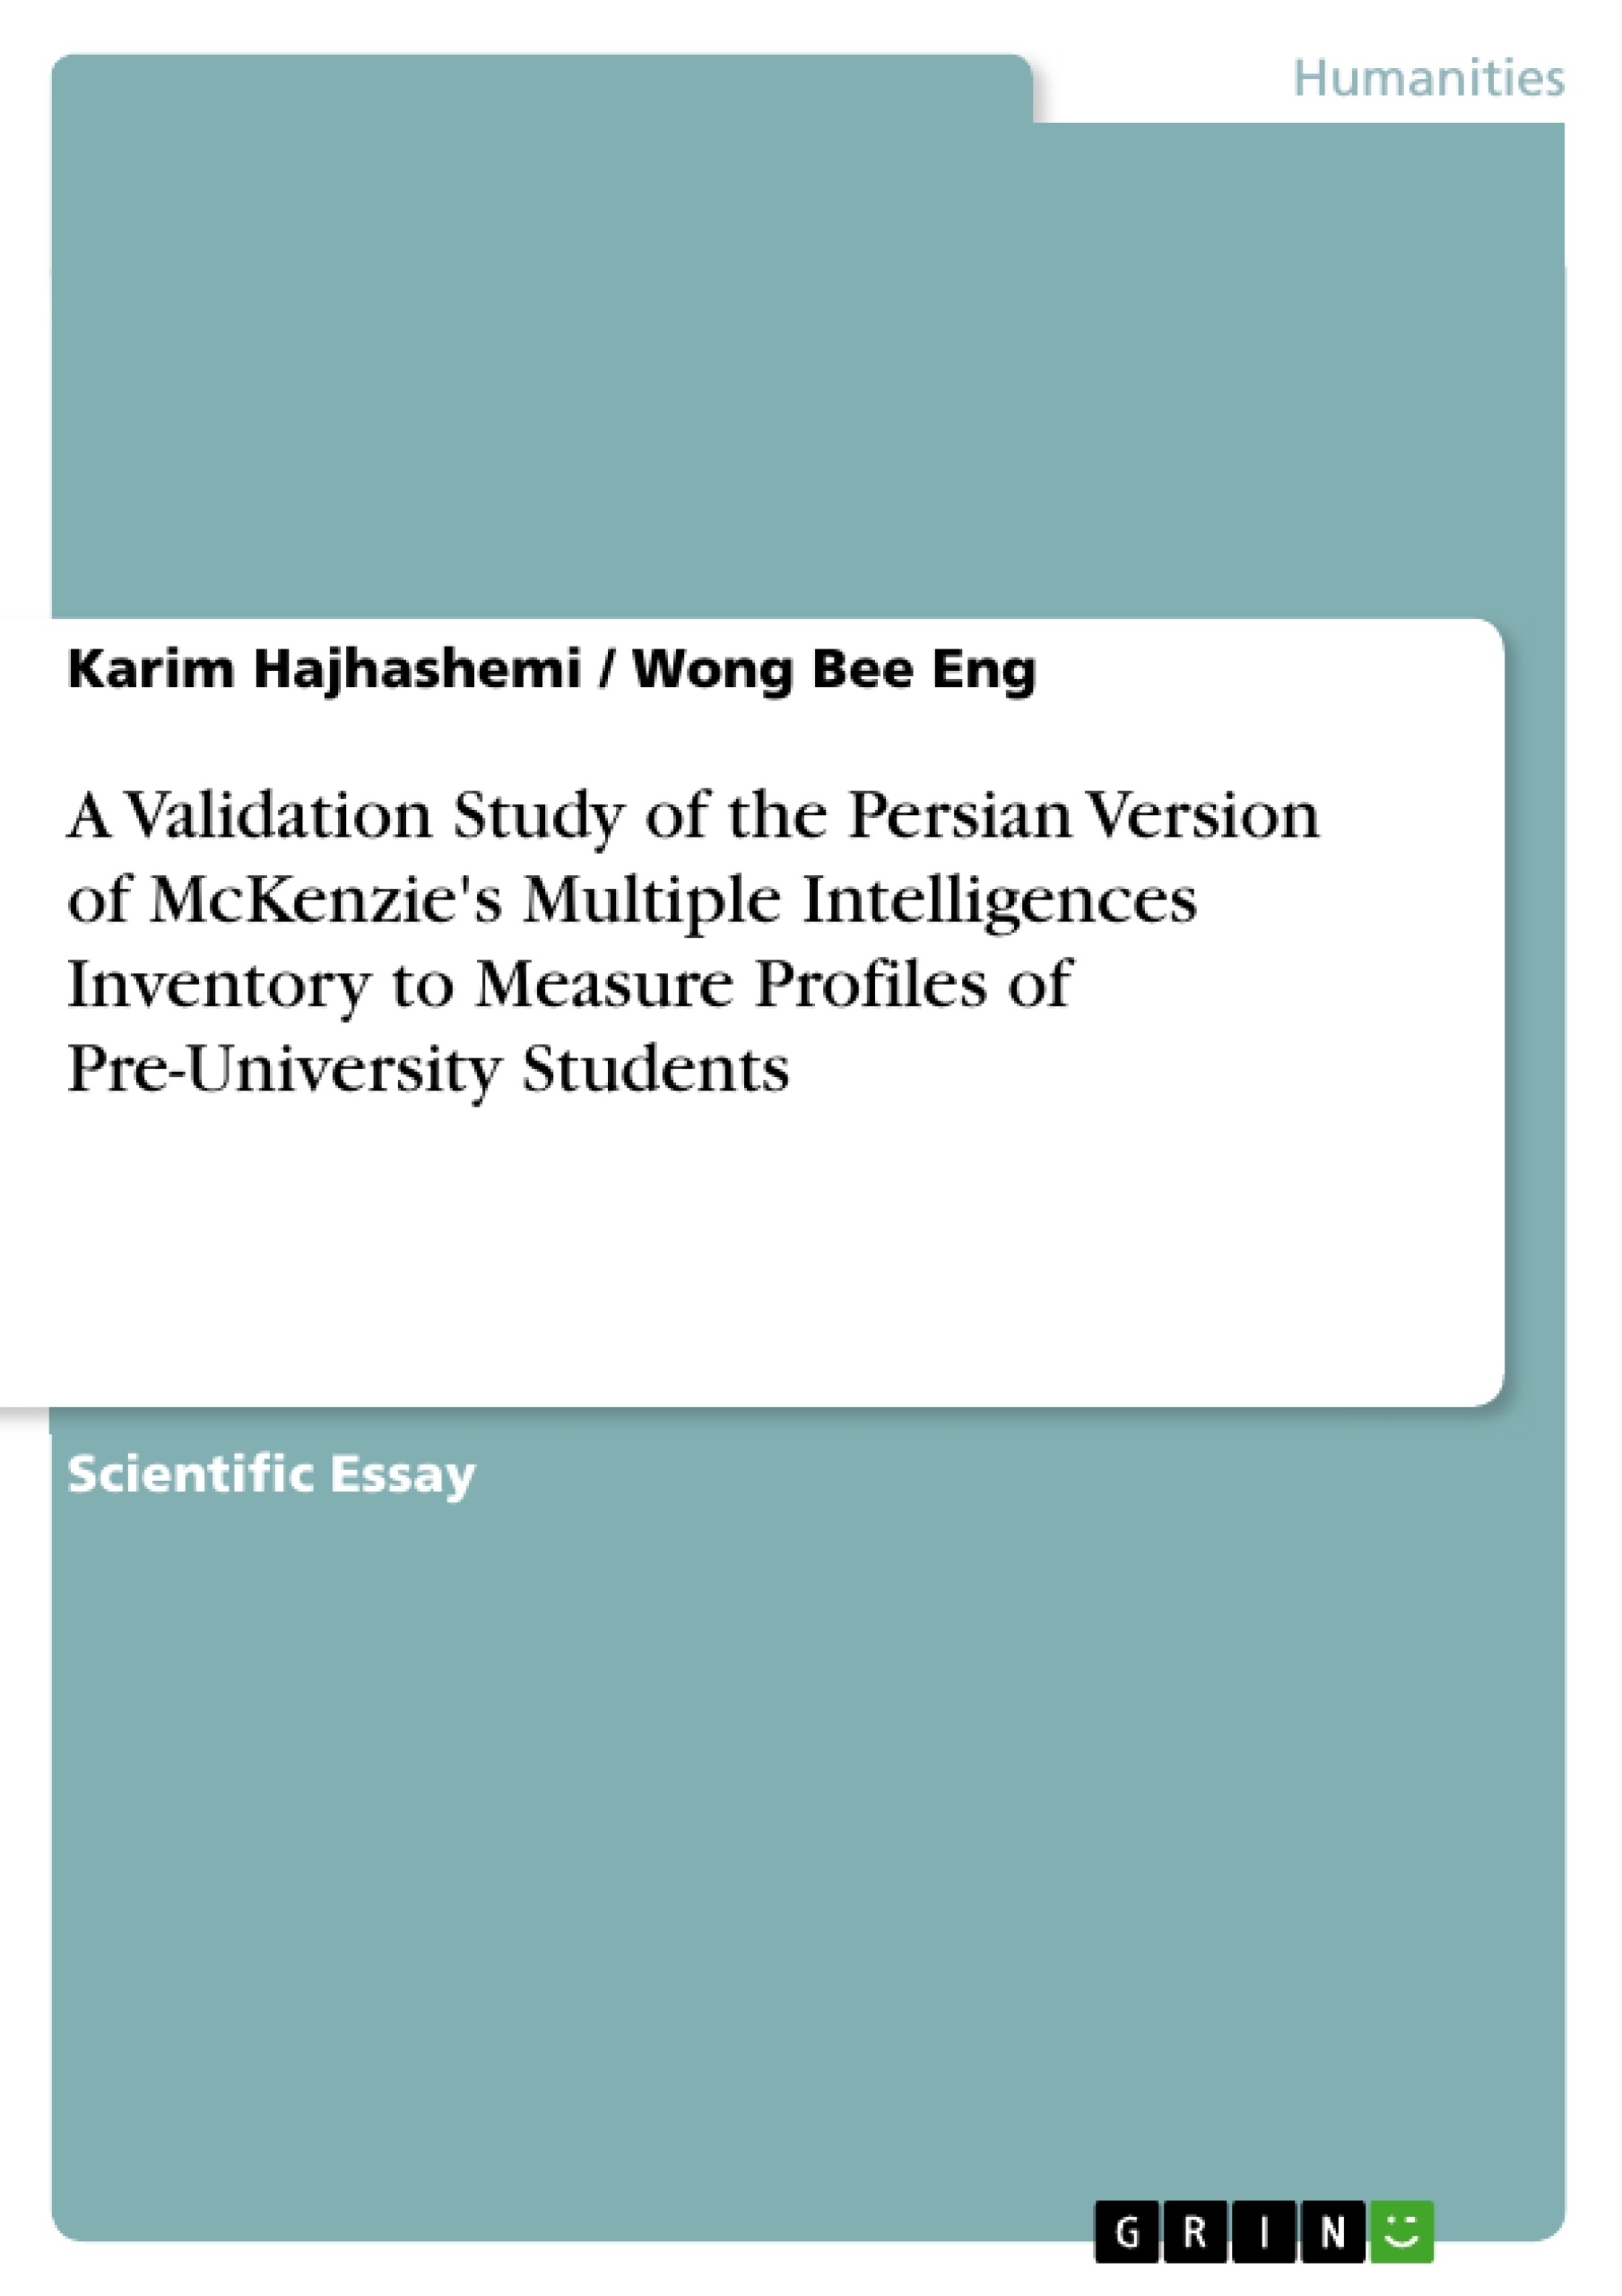 Title: A Validation Study of the Persian Version of McKenzie's Multiple Intelligences Inventory to Measure Profiles of Pre-University Students